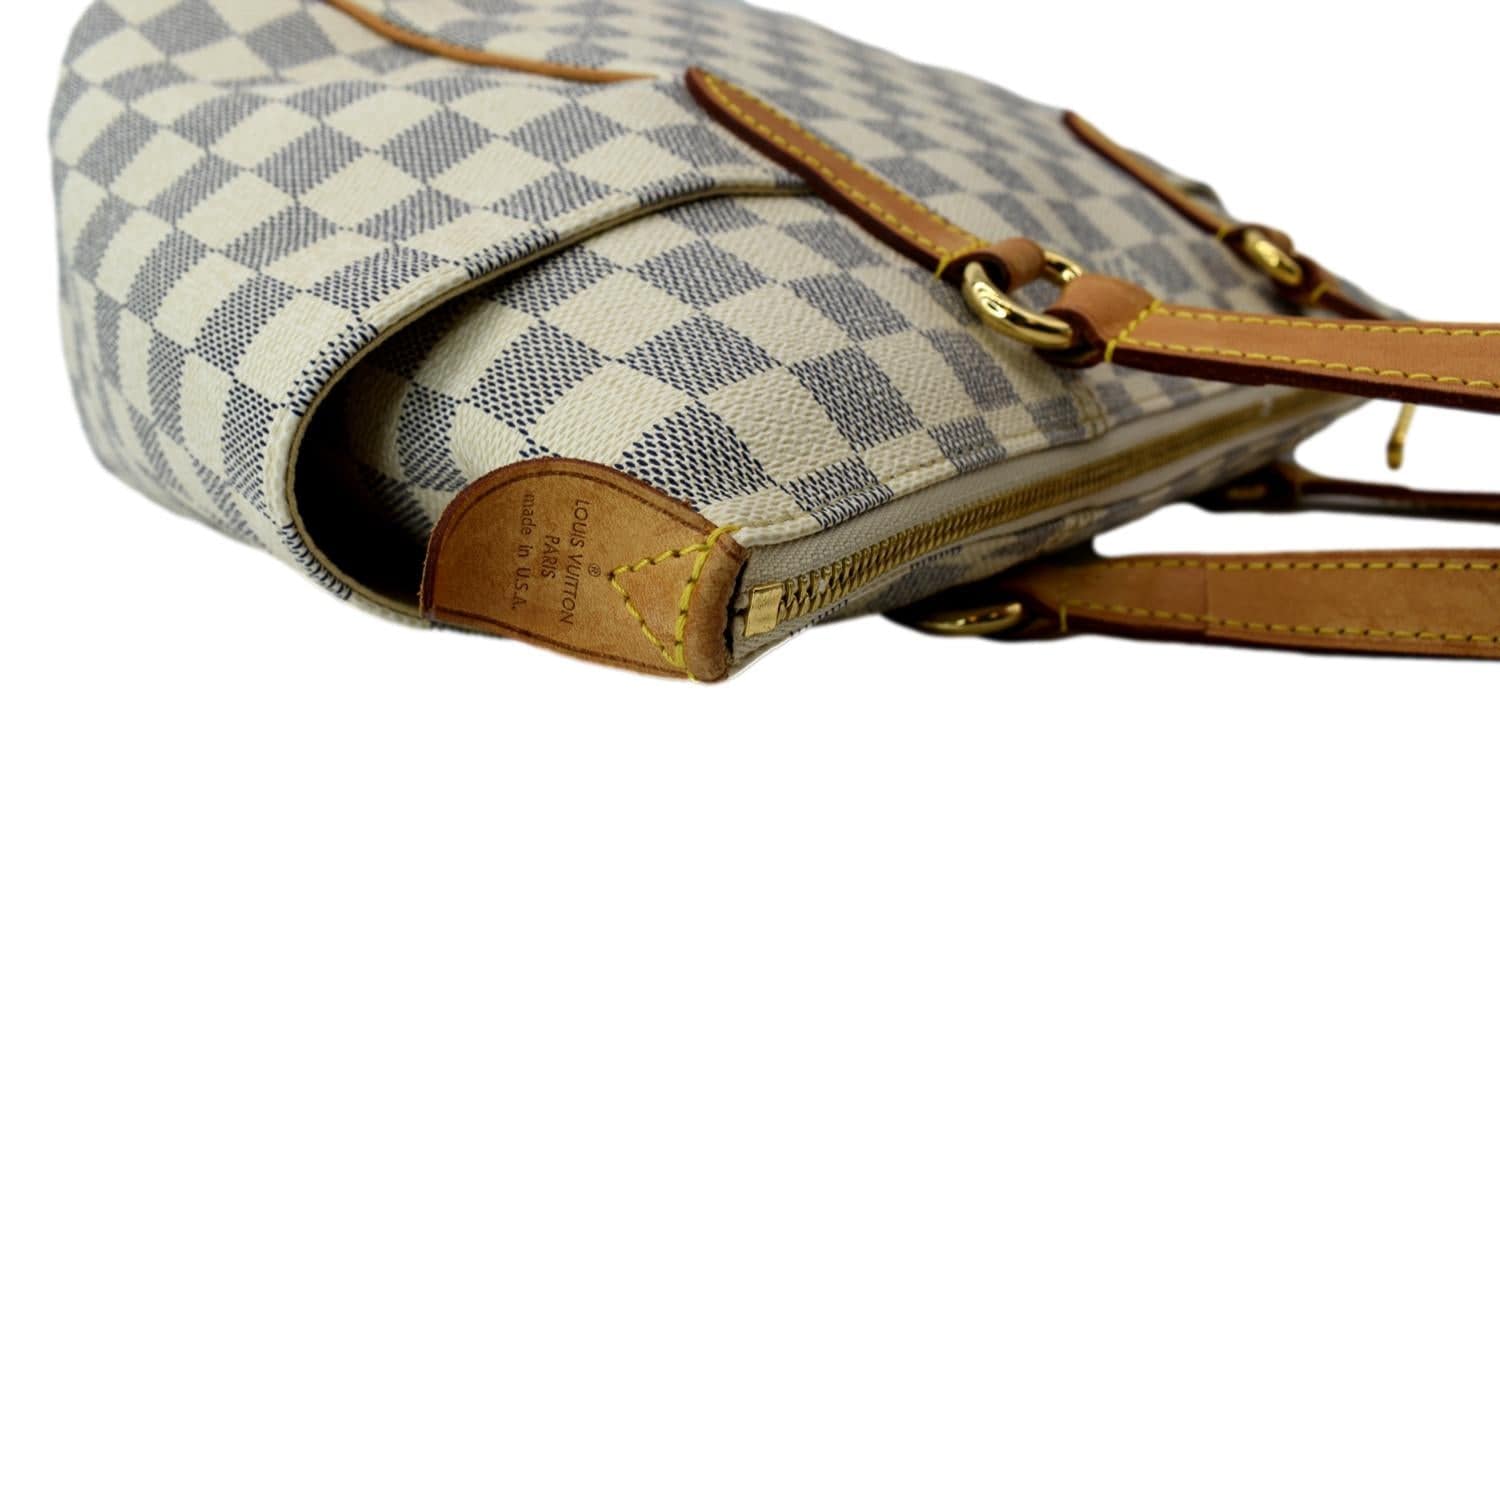 LOUIS VUITTON Damier Azur Totally MM – Collections Couture